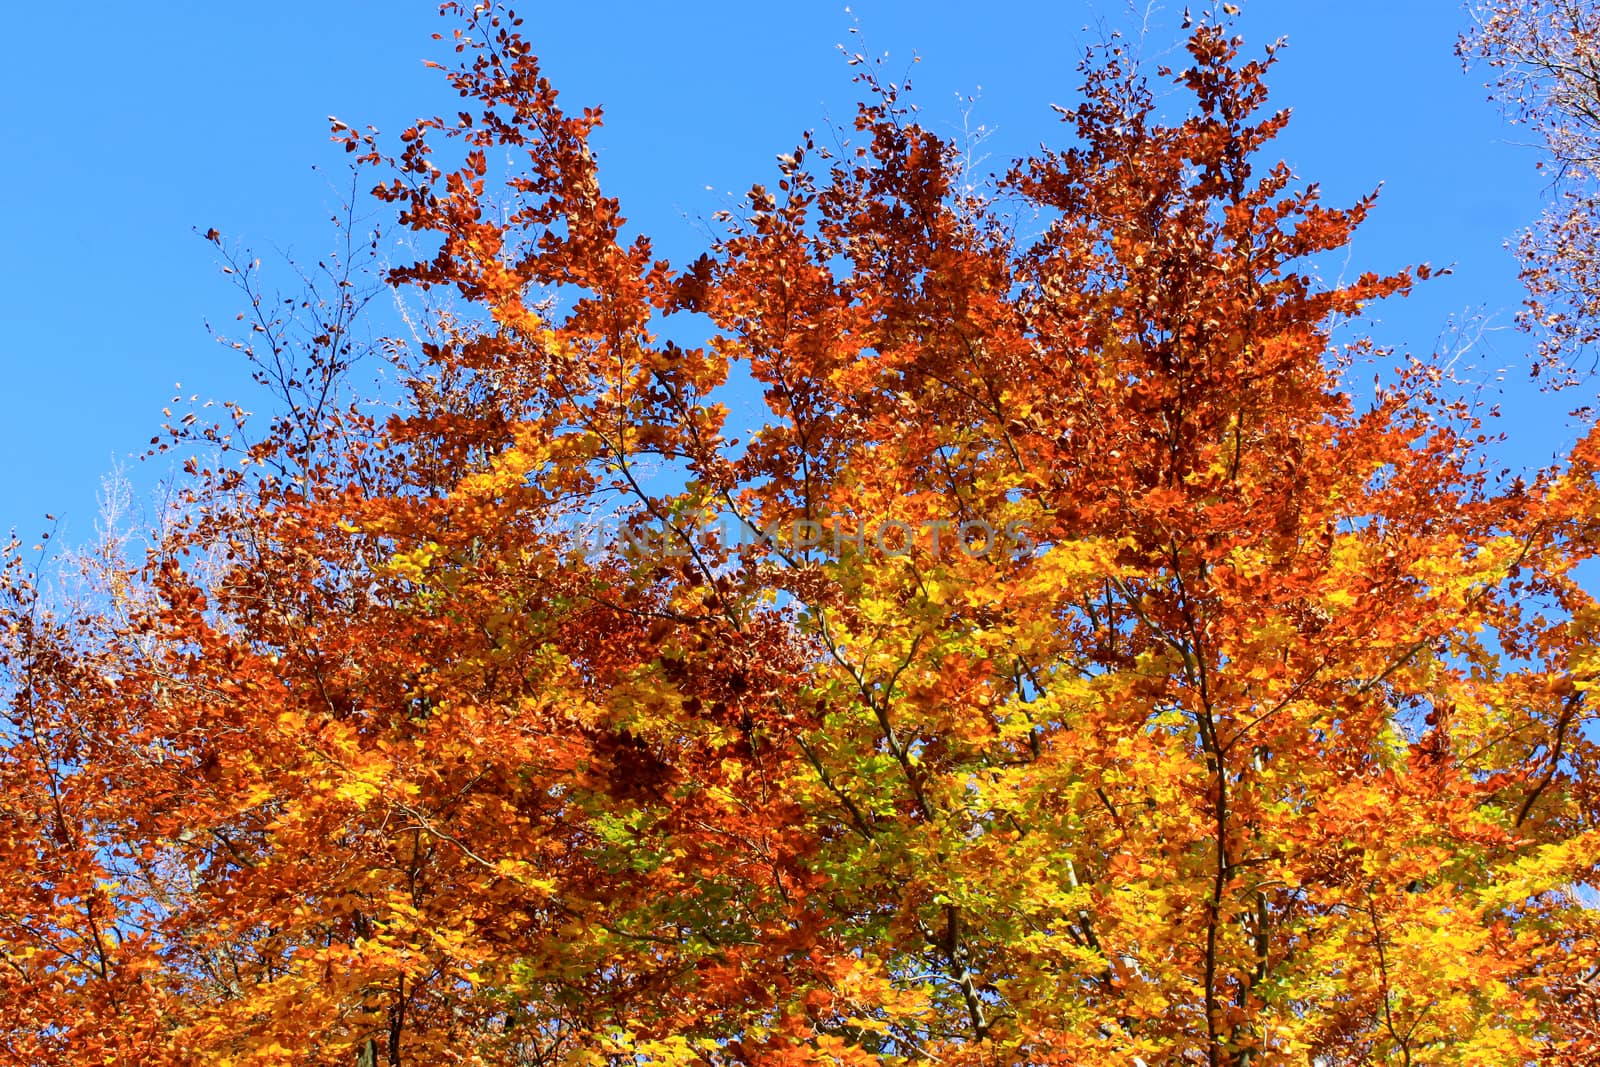 Beech with its autumn foliage on a bottom of blue sky